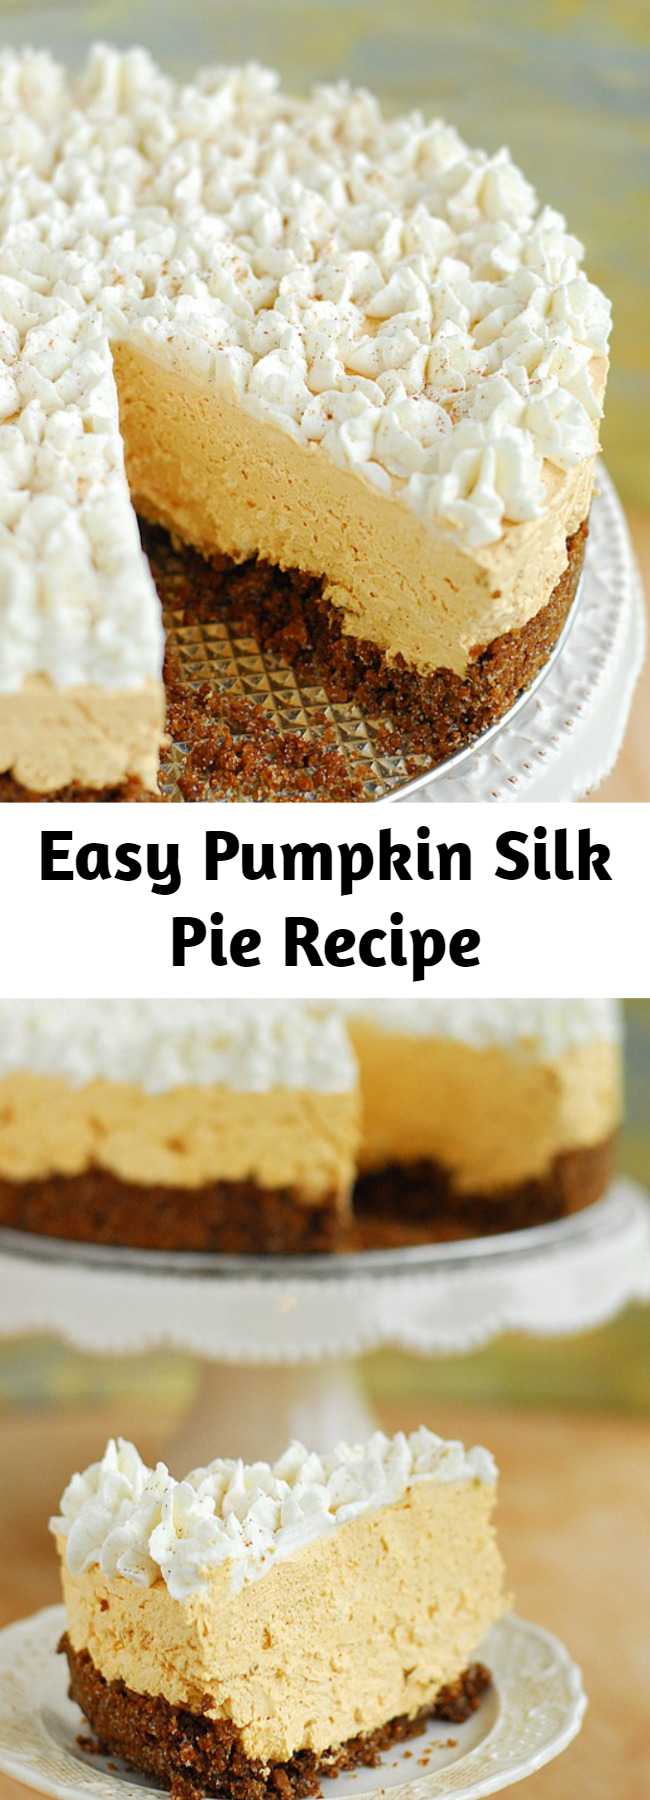 Easy Pumpkin Silk Pie Recipe - This Pumpkin Silk Pie is a delicious holiday dessert recipe that is easy to make. Pumpkin dessert recipes are perfect for holiday parties and this pie is a fun alternative to the traditional pumpkin pie.